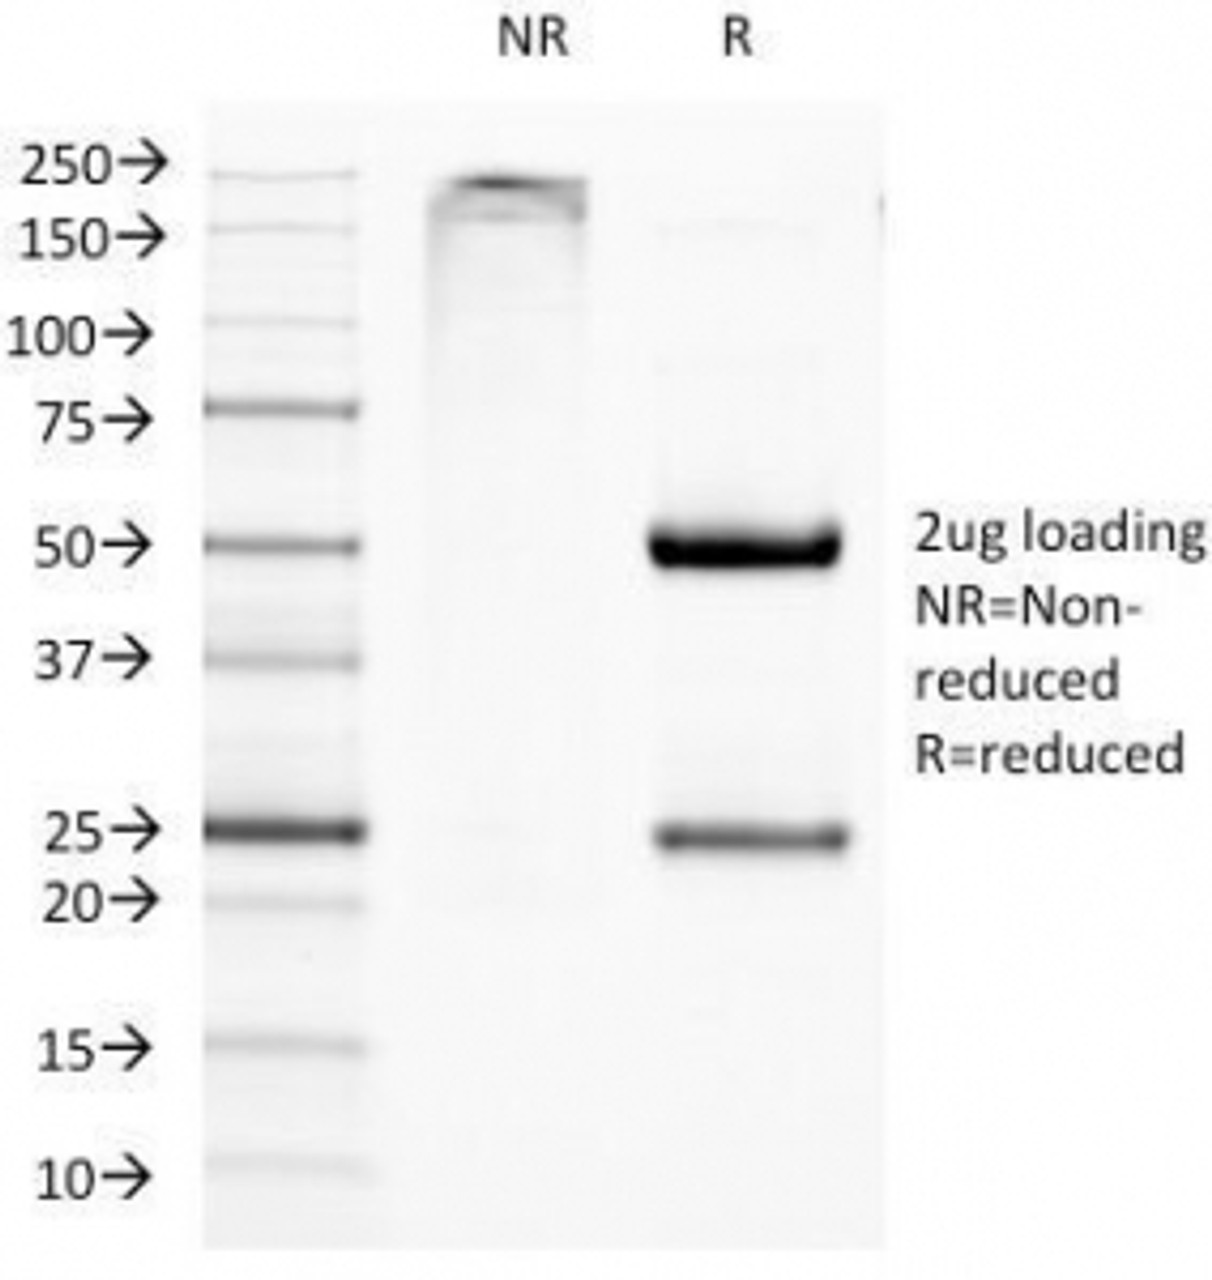 SDS-PAGE Analysis of Purified, BSA-Free CD11c Antibody (clone ITGAX/1284) . Confirmation of Integrity and Purity of the Antibody.